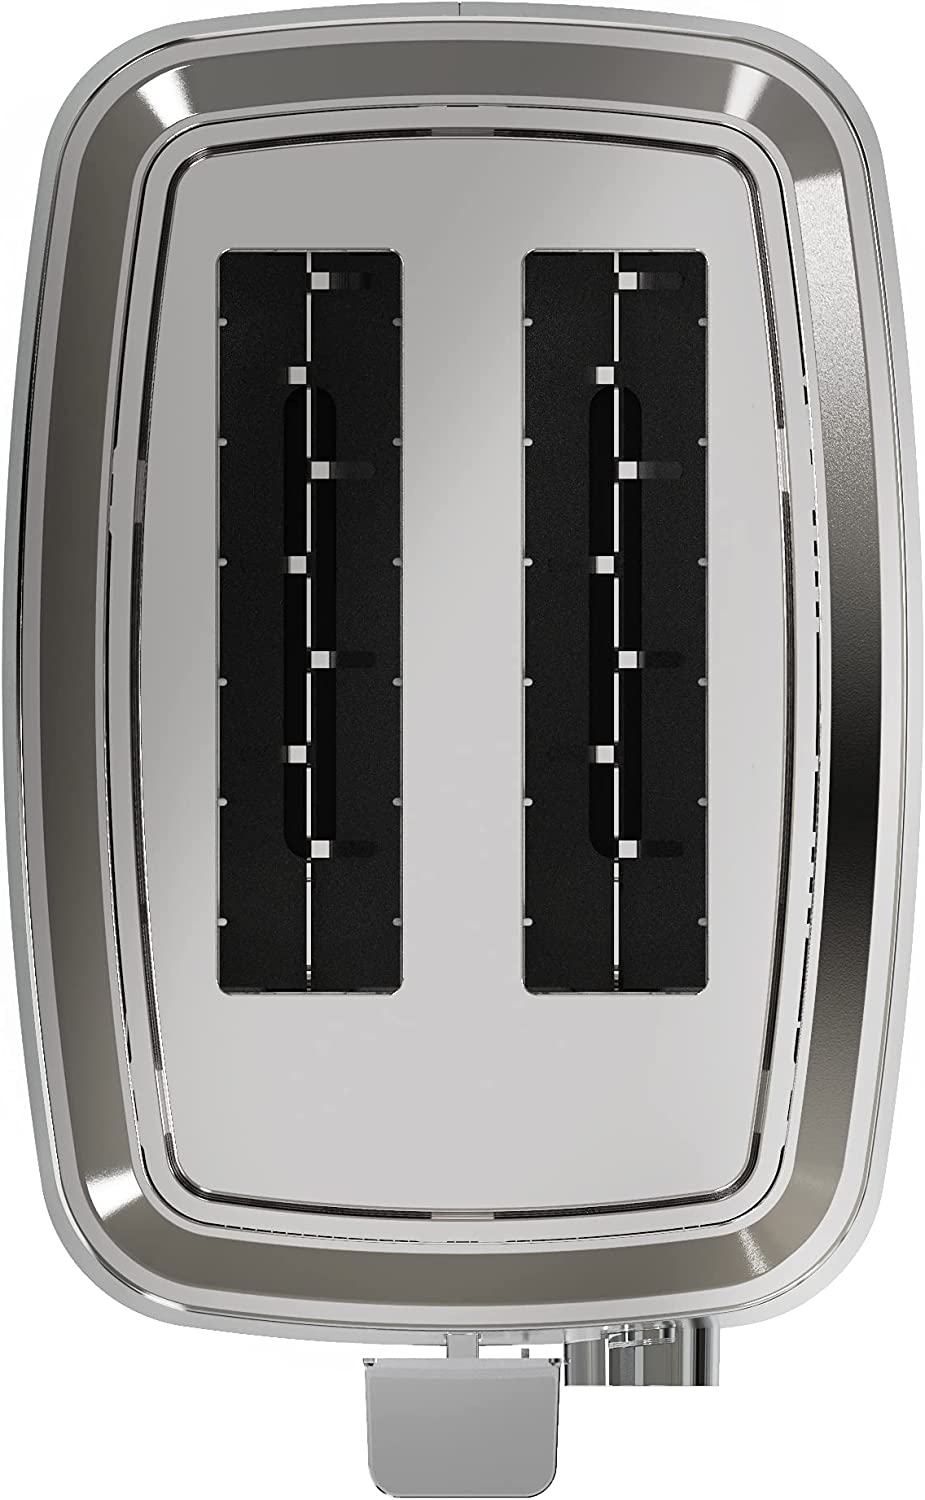 GE 2-Slice Stainless Steel Wide Slot Toaster with 7 Shade Settings